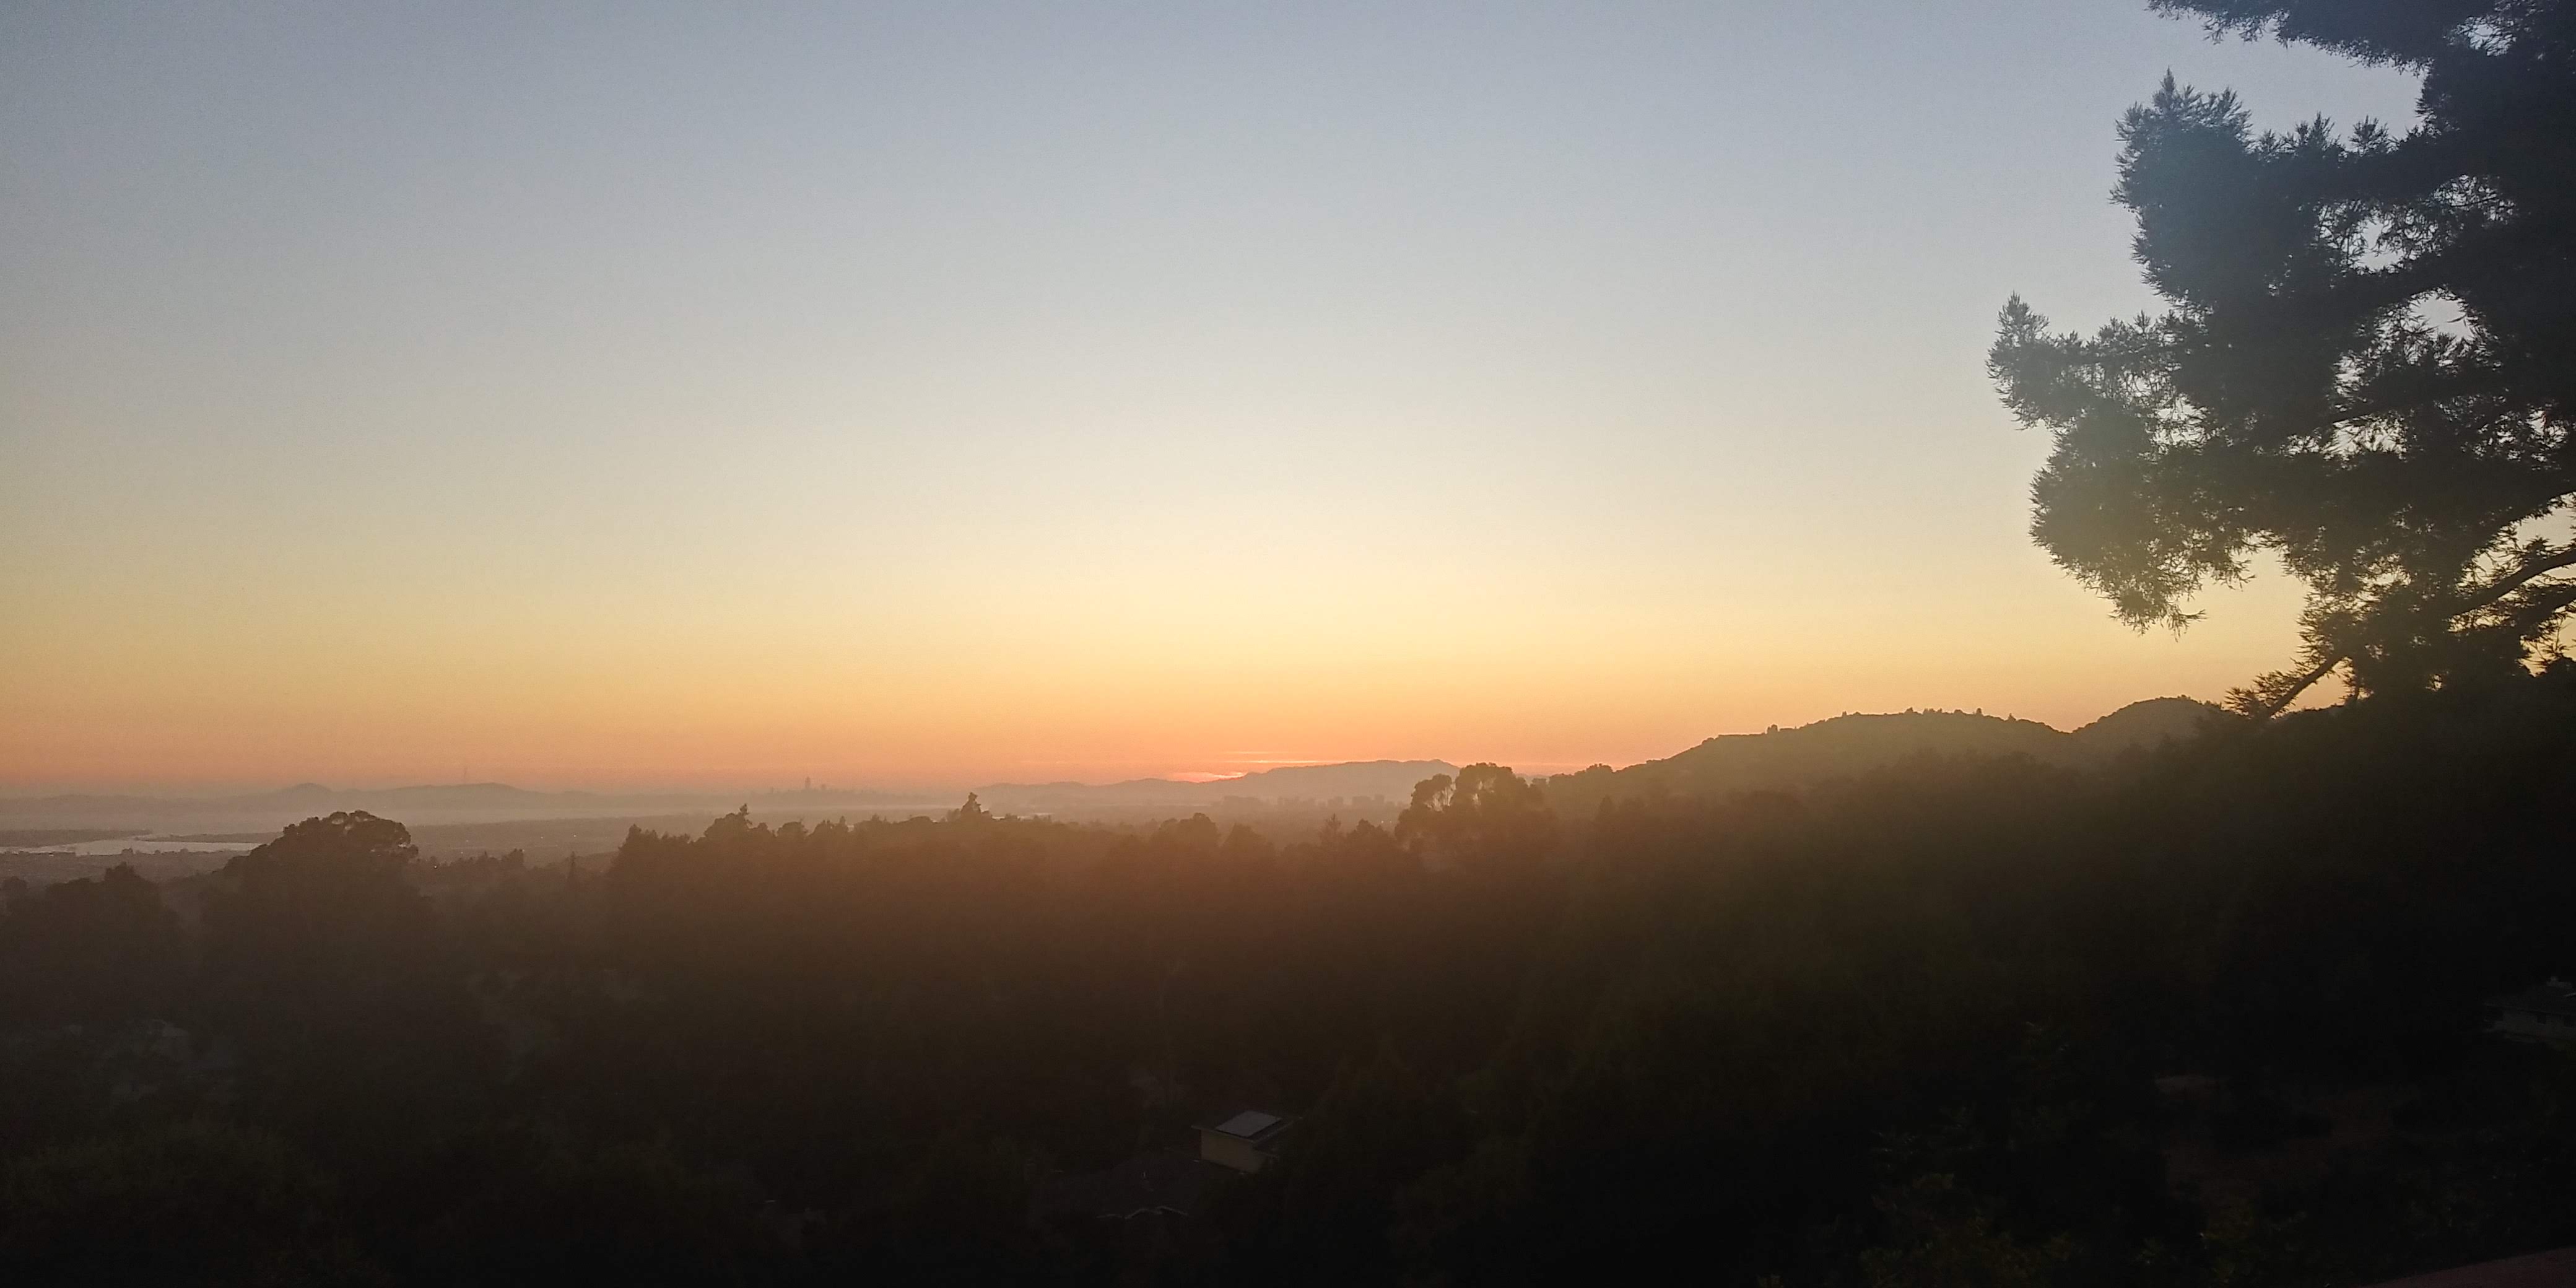 Sunset in the Oakland hills